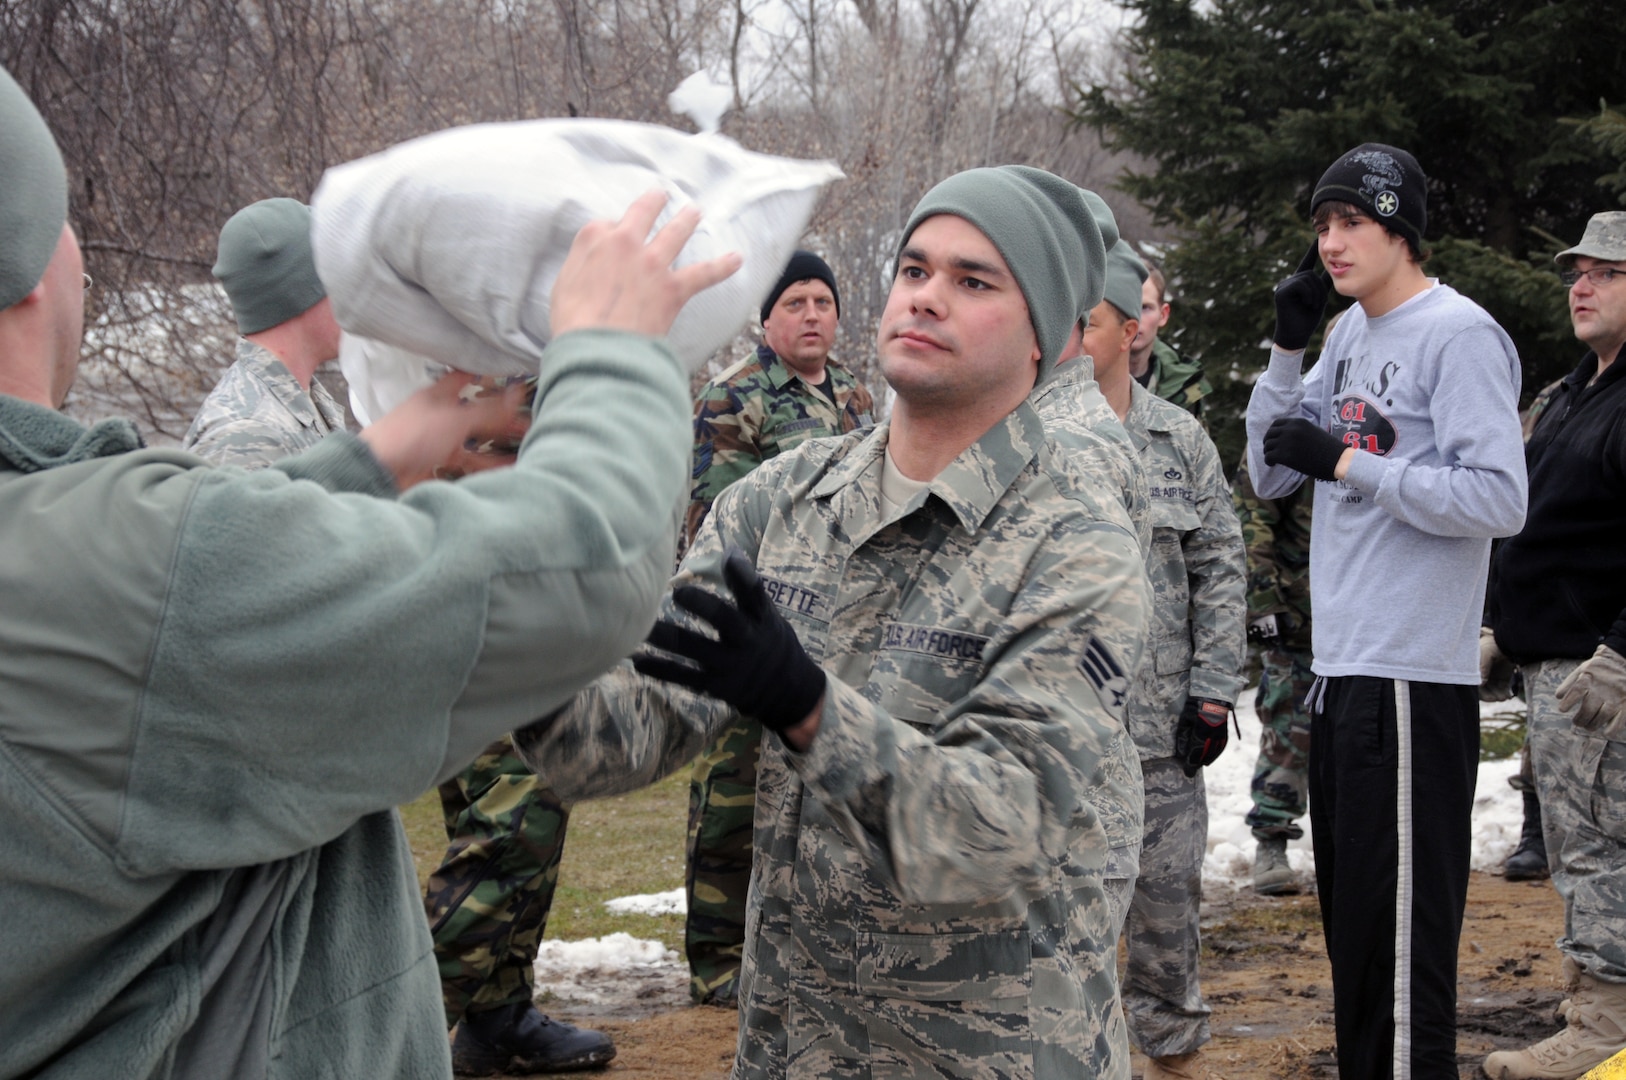 Senior Airman Travis Besette, of the 119th Civil Engineer Squadron, center, catches a sandbag to pass along a human chain of National Guard members March 16, Fargo, N.D. The North Dakota Airmen from the 119th Wing were woven in between local high school student volunteers in sandbag lines that extended from pallets on the street and in driveways, through garages and out back doors. The quickly rising river behind them reminded them of the urgency of their mission.